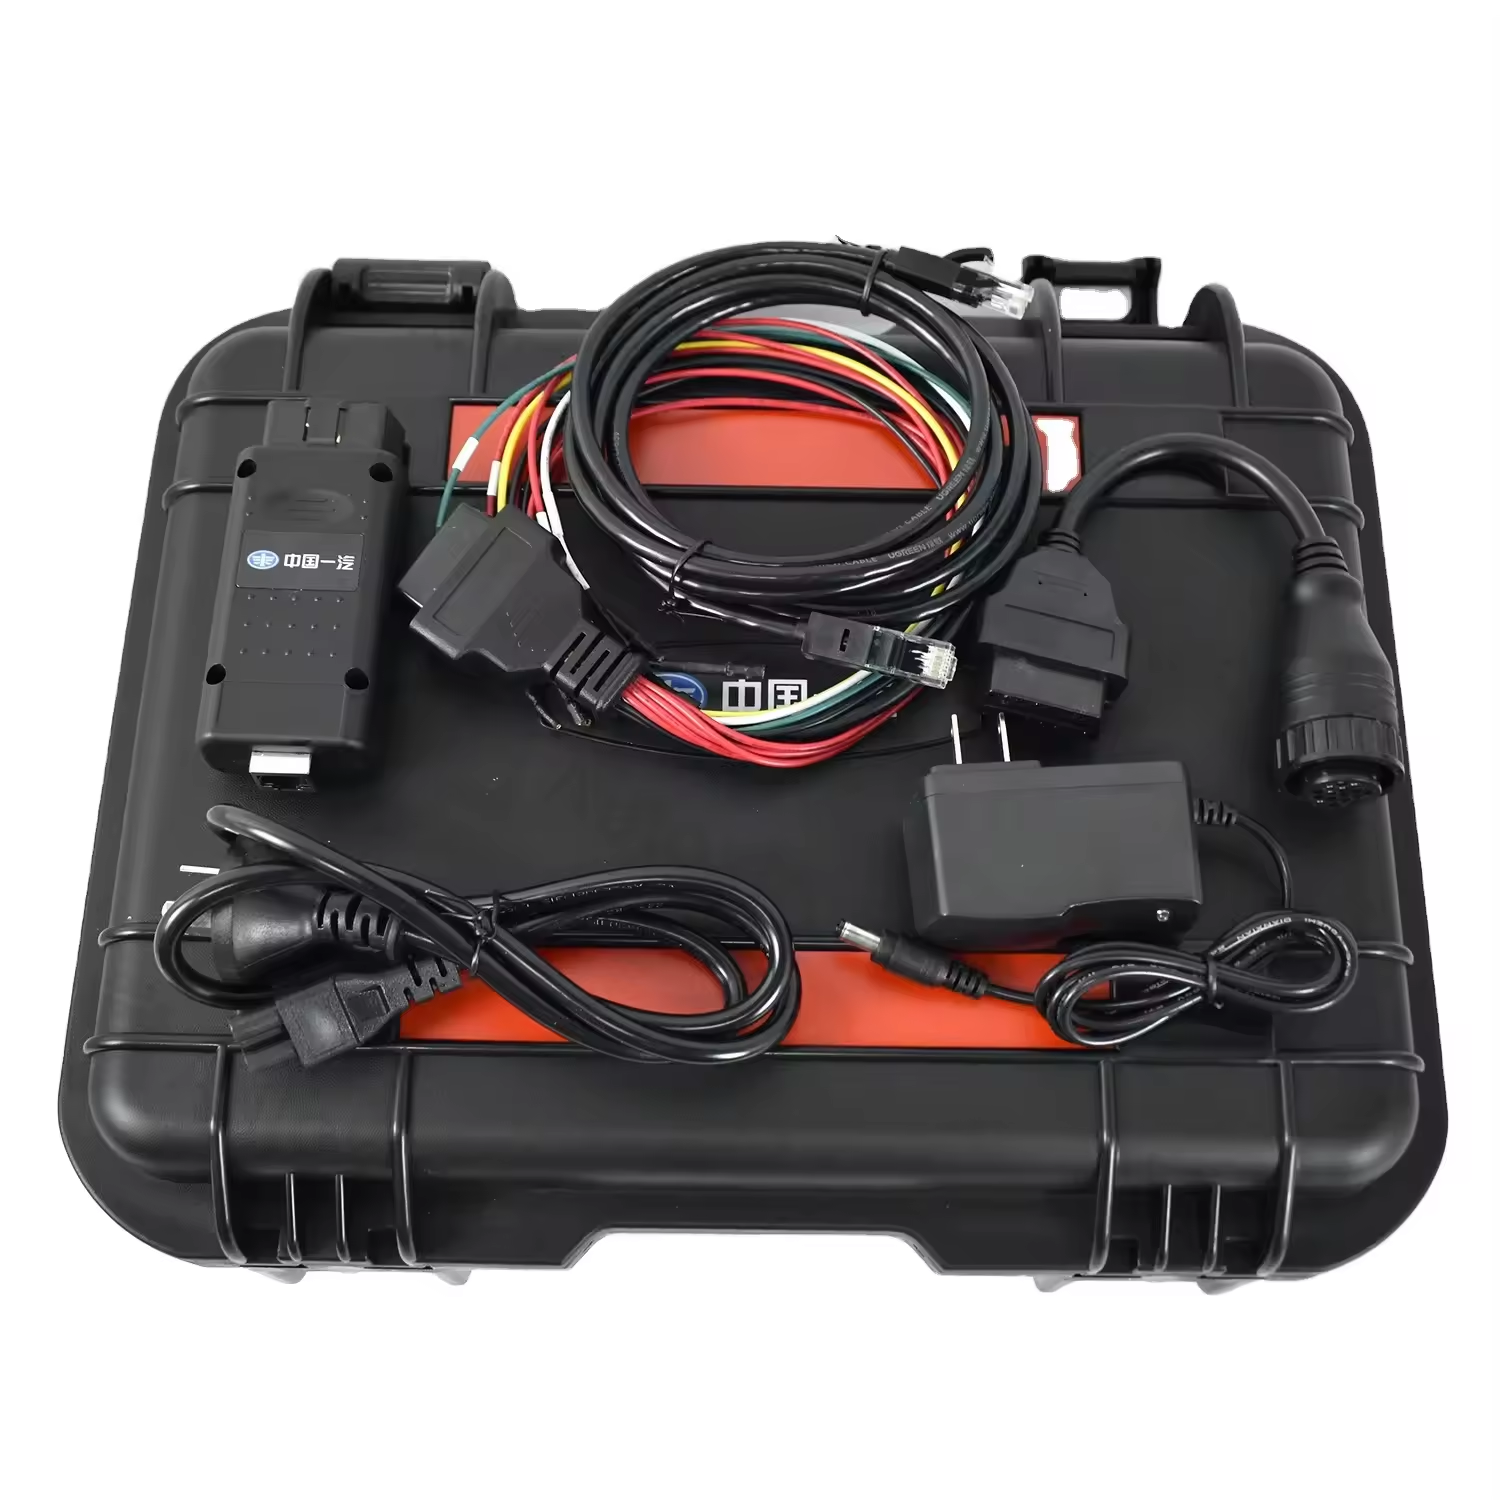 2024 FAW Control Unit Machinery Transmission Control Industrial Construction Diagnostic Scanner Tool Support Online ECU Programming